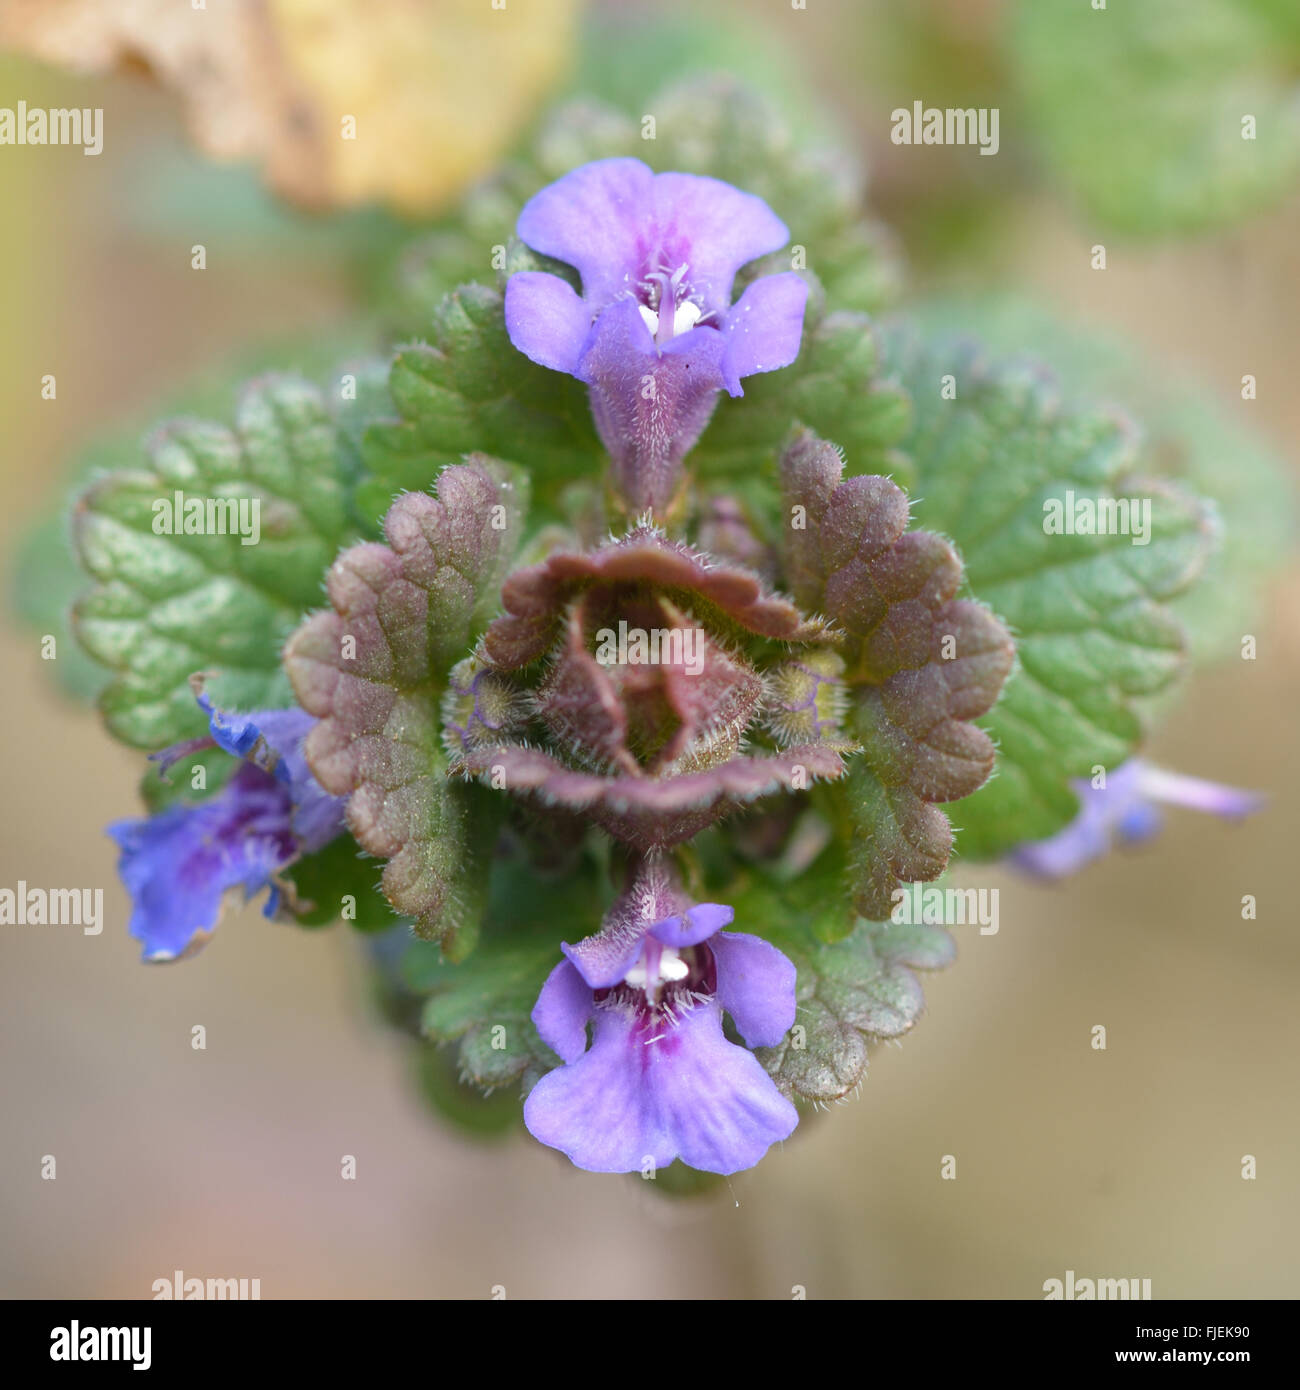 Ground ivy (Glechoma hederacea). Looking down on a flower head of this purple flower in the mint family (Lamiaceae) Stock Photo